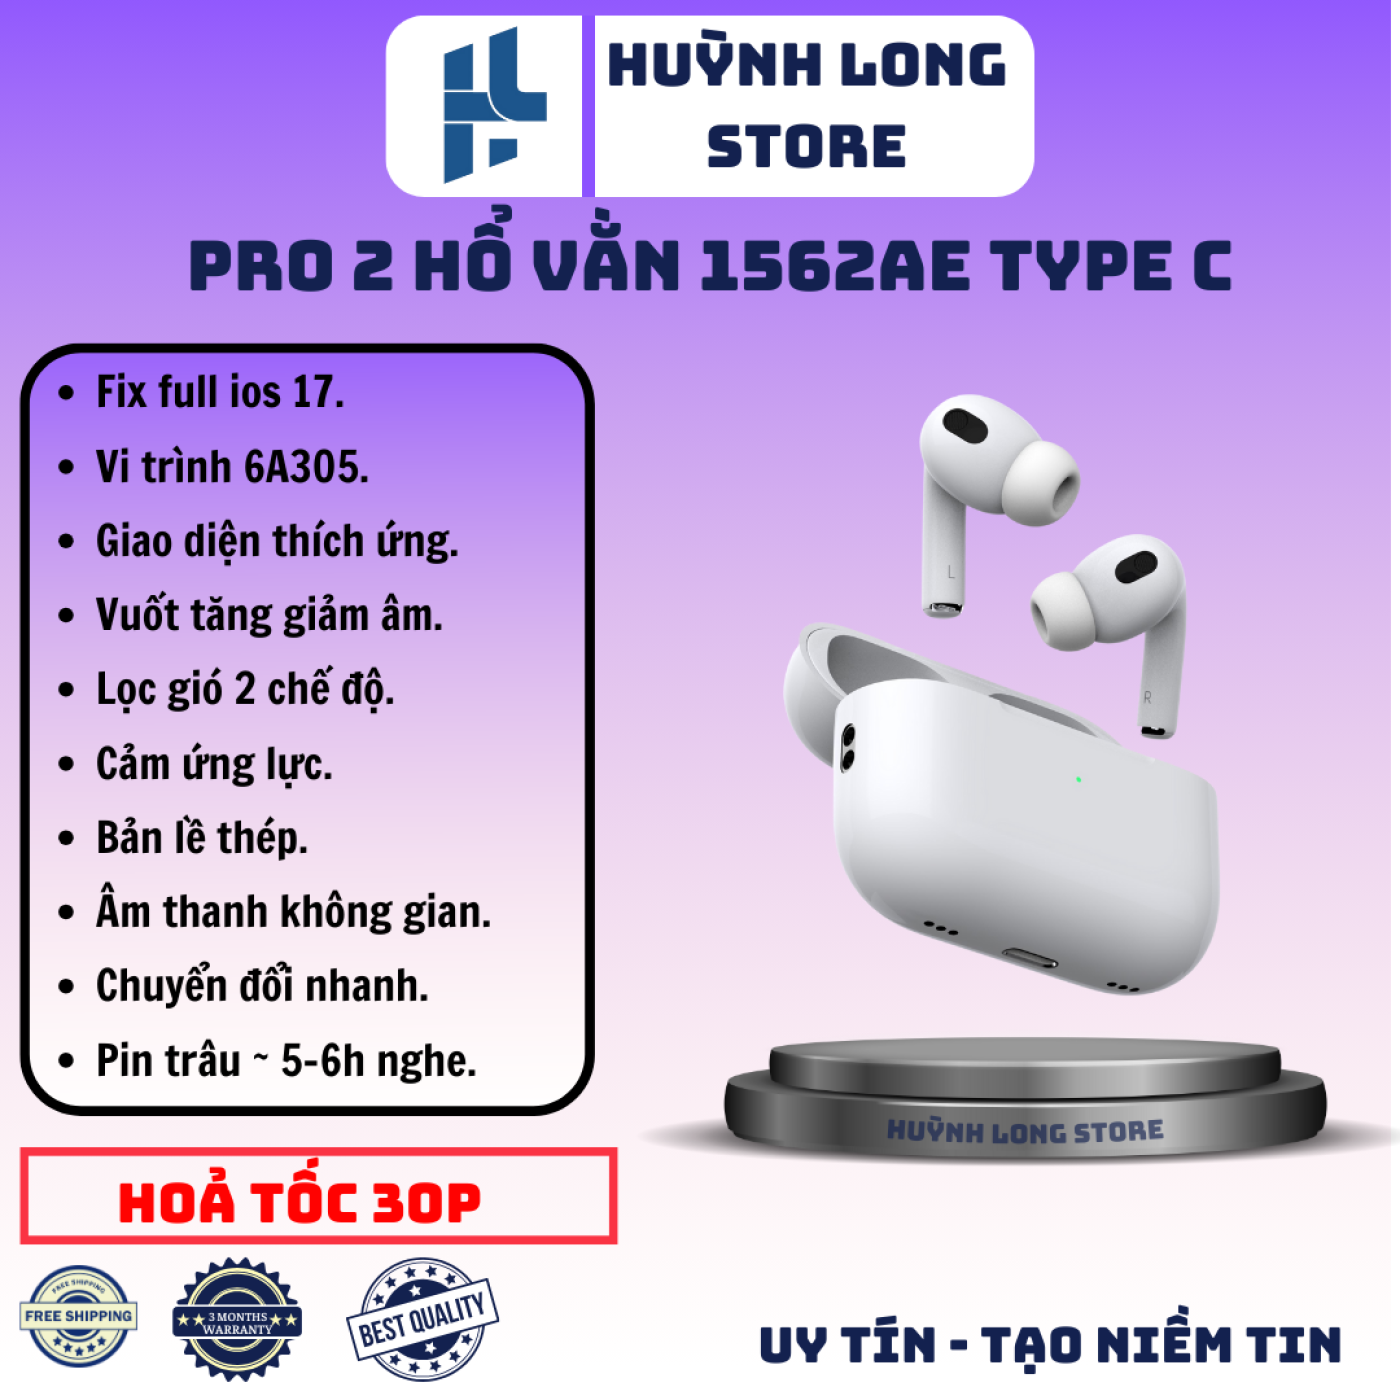 Tai Nghe Airpods Pro 2 Hổ Vằn 1562AE